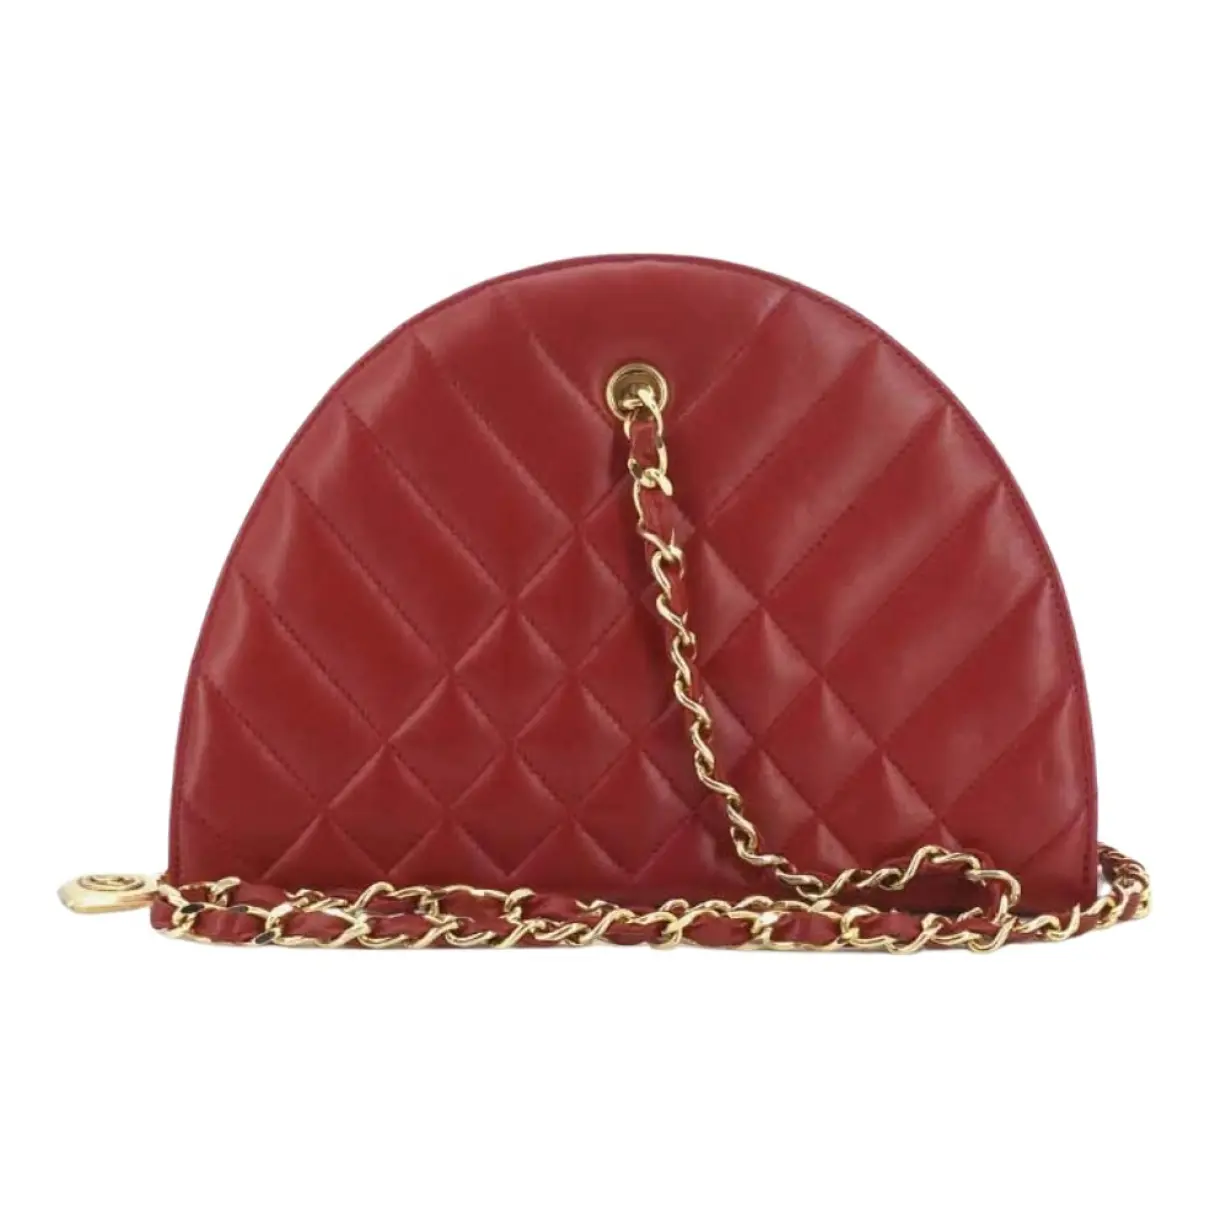 Trendy CC Quilted leather handbag Chanel - Vintage